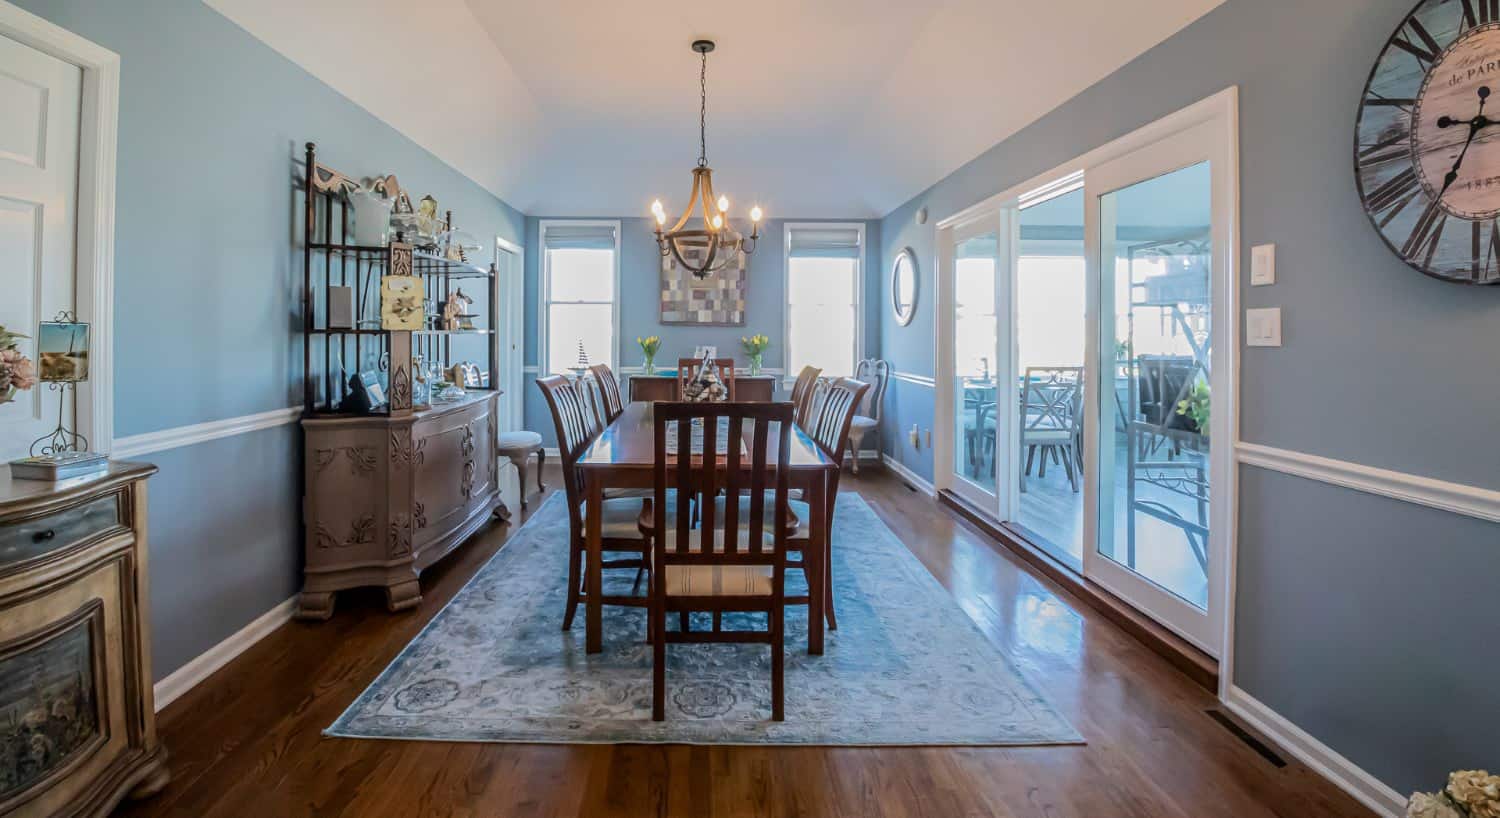 Dining room with light blue walls, hardwood flooring, wood table and chairs, and view into game room